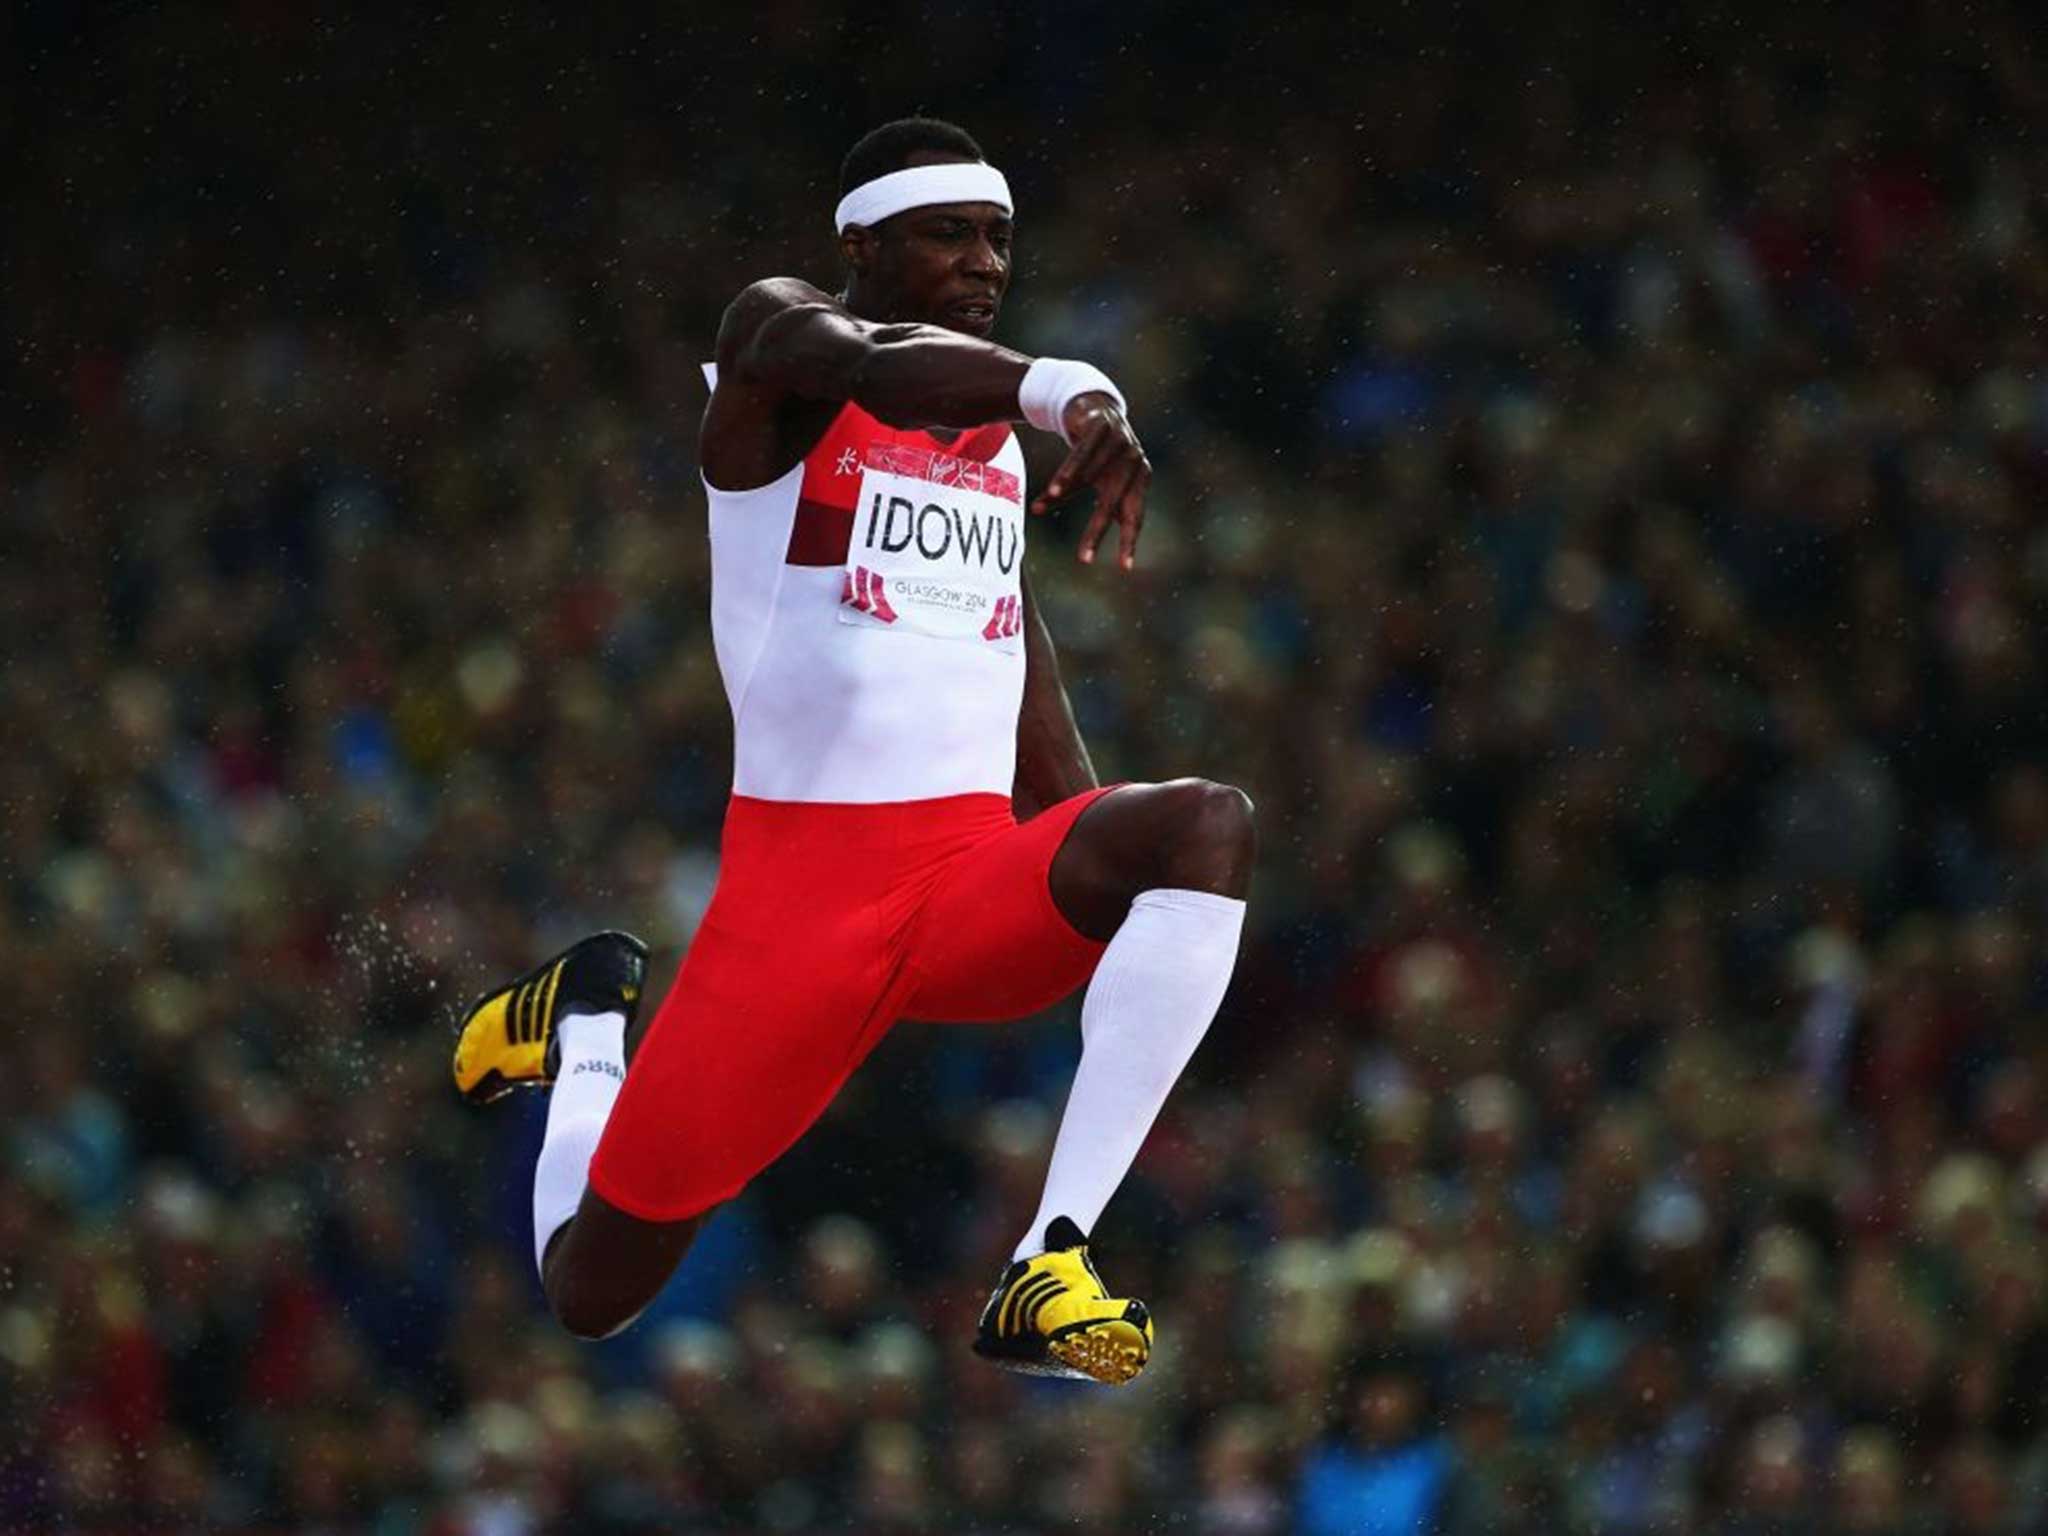 Clean cut: Philips Odowu looks the part but falls well short of a medal  